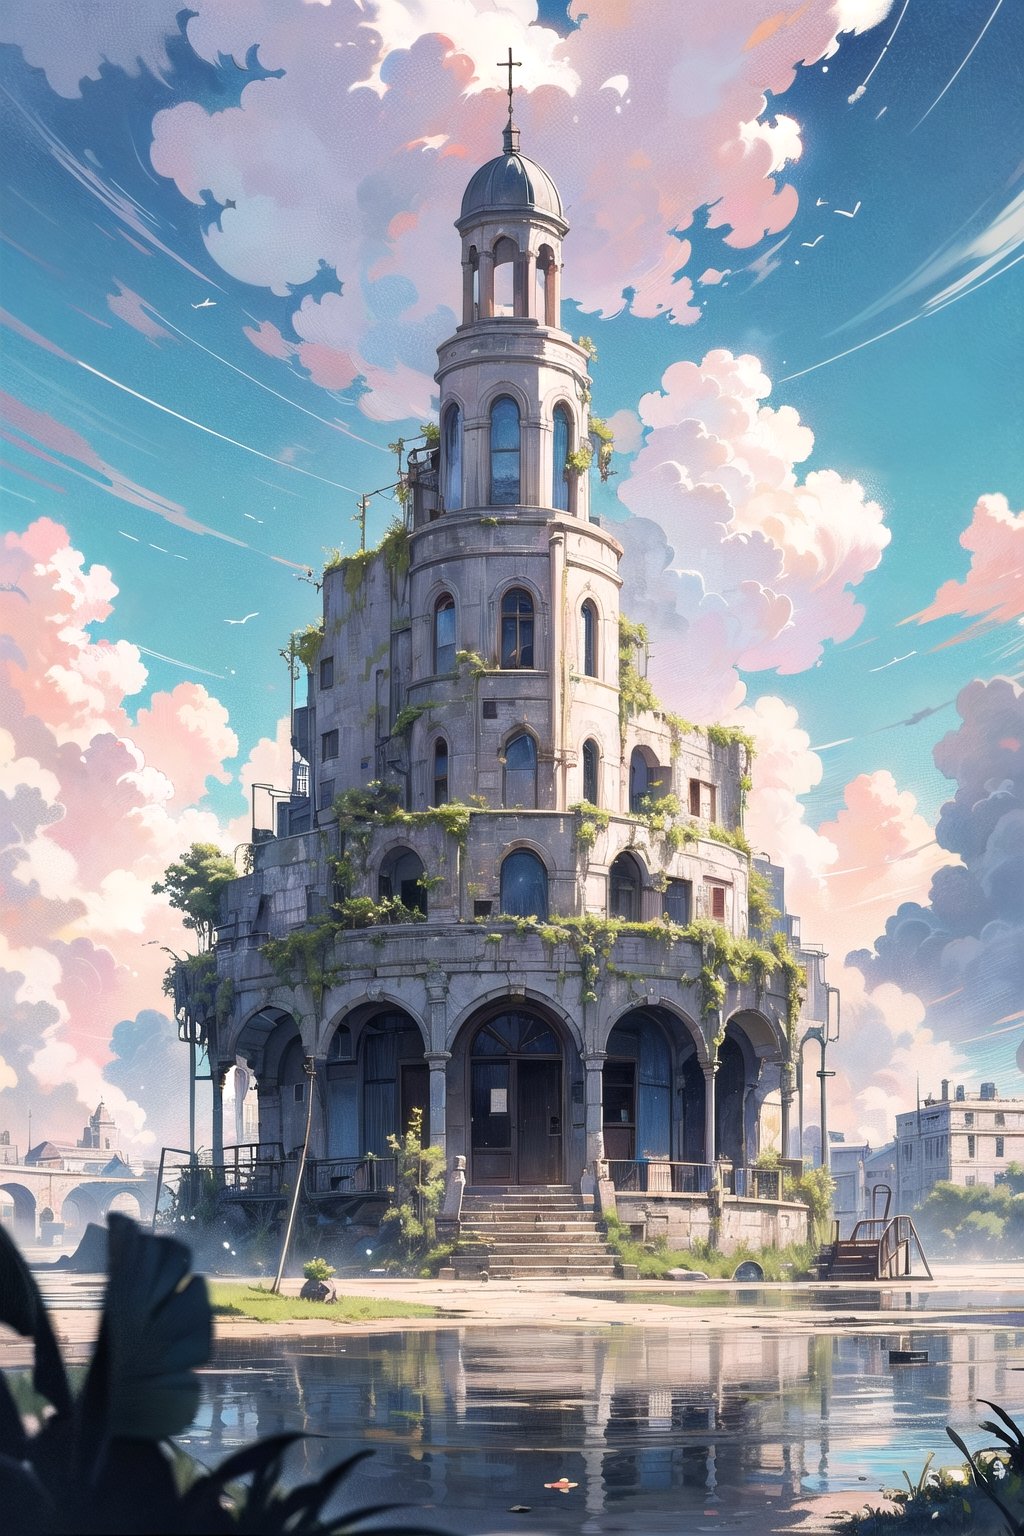 (fulldetail), (4k), 8k, scenery, sky, outdoors, day, building, water, bluesky, water craft, boat, reflection, flower, The scene is filled with broken buildings, crumbling ruins, overgrown vegetation, and a sense of desolation.decorated with colorful drawings, scattered books, and remnants of a world that once was. The air is heavy with a mixture of dust and nostalgia,midjourney,4esthet1c